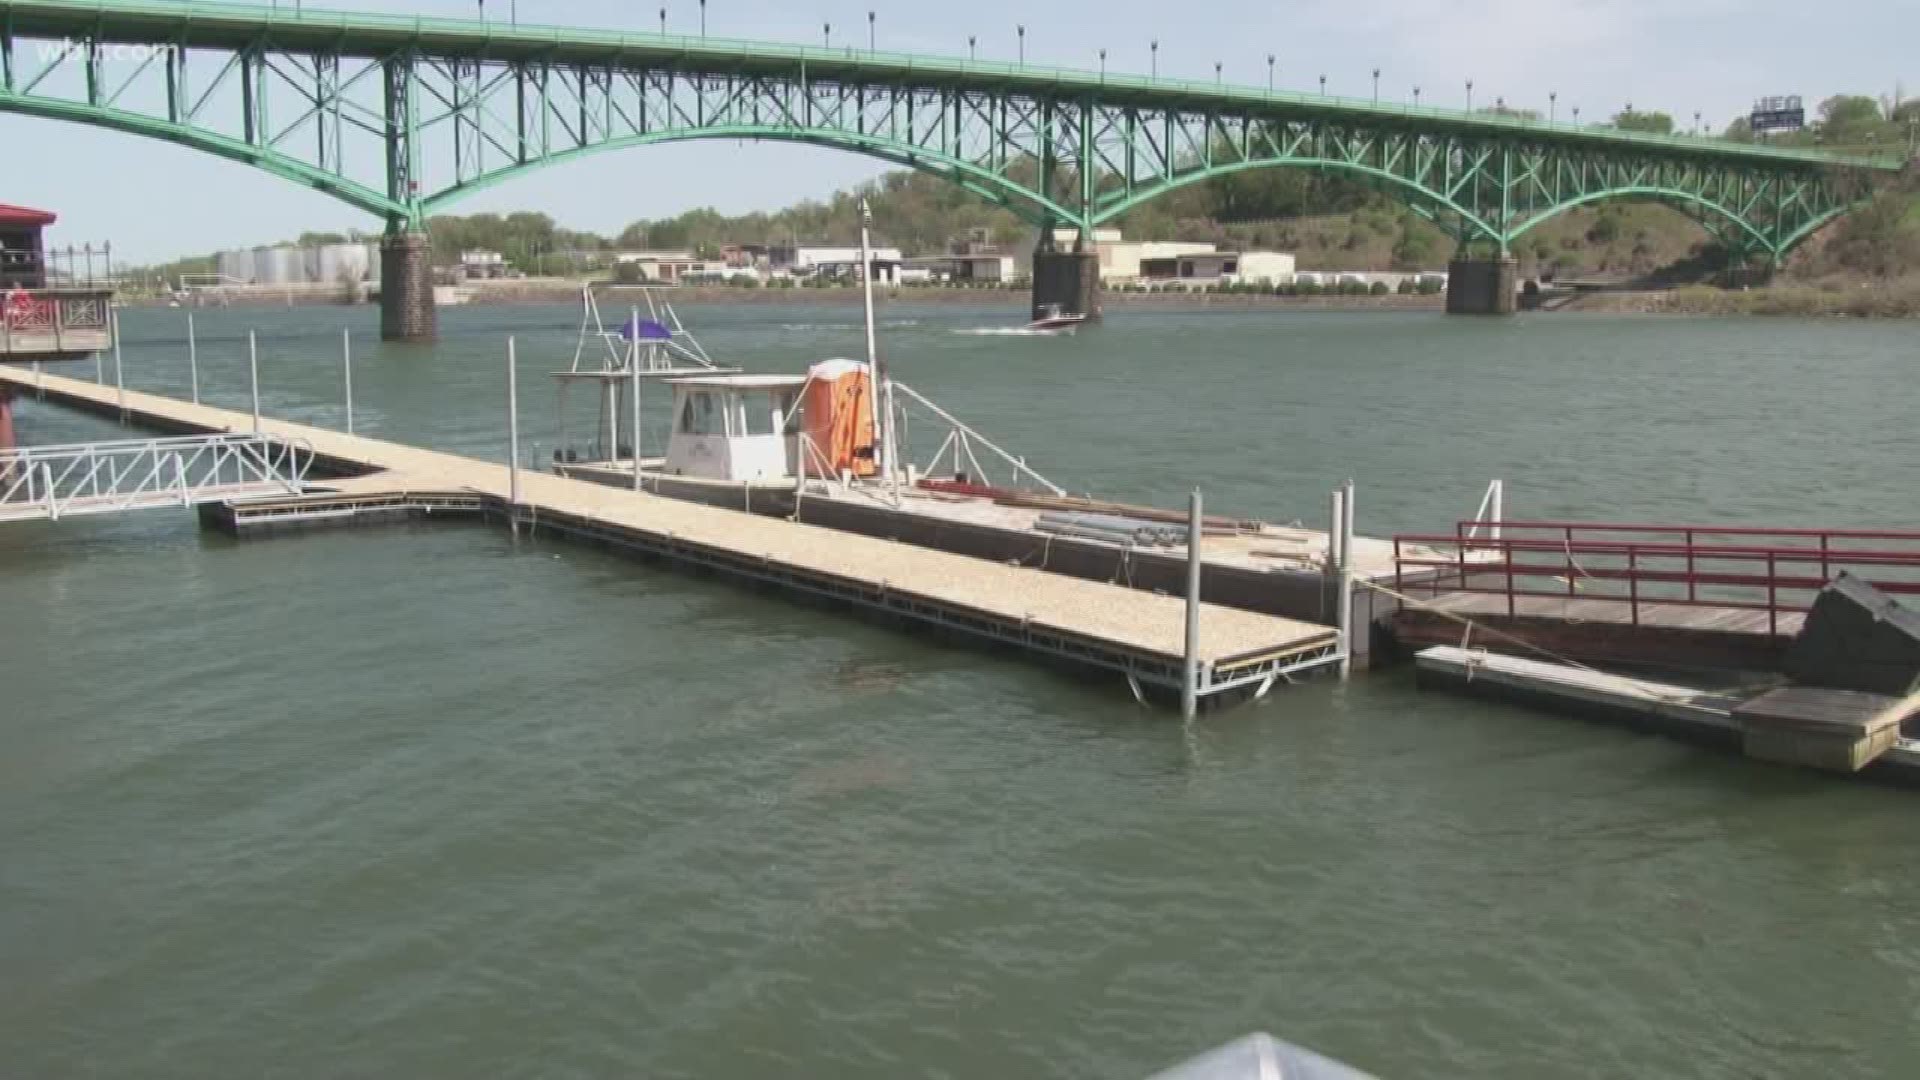 April 18, 2018: The city of Knoxville hopes to open a new public dock at Volunteer Landing by the end of the month.